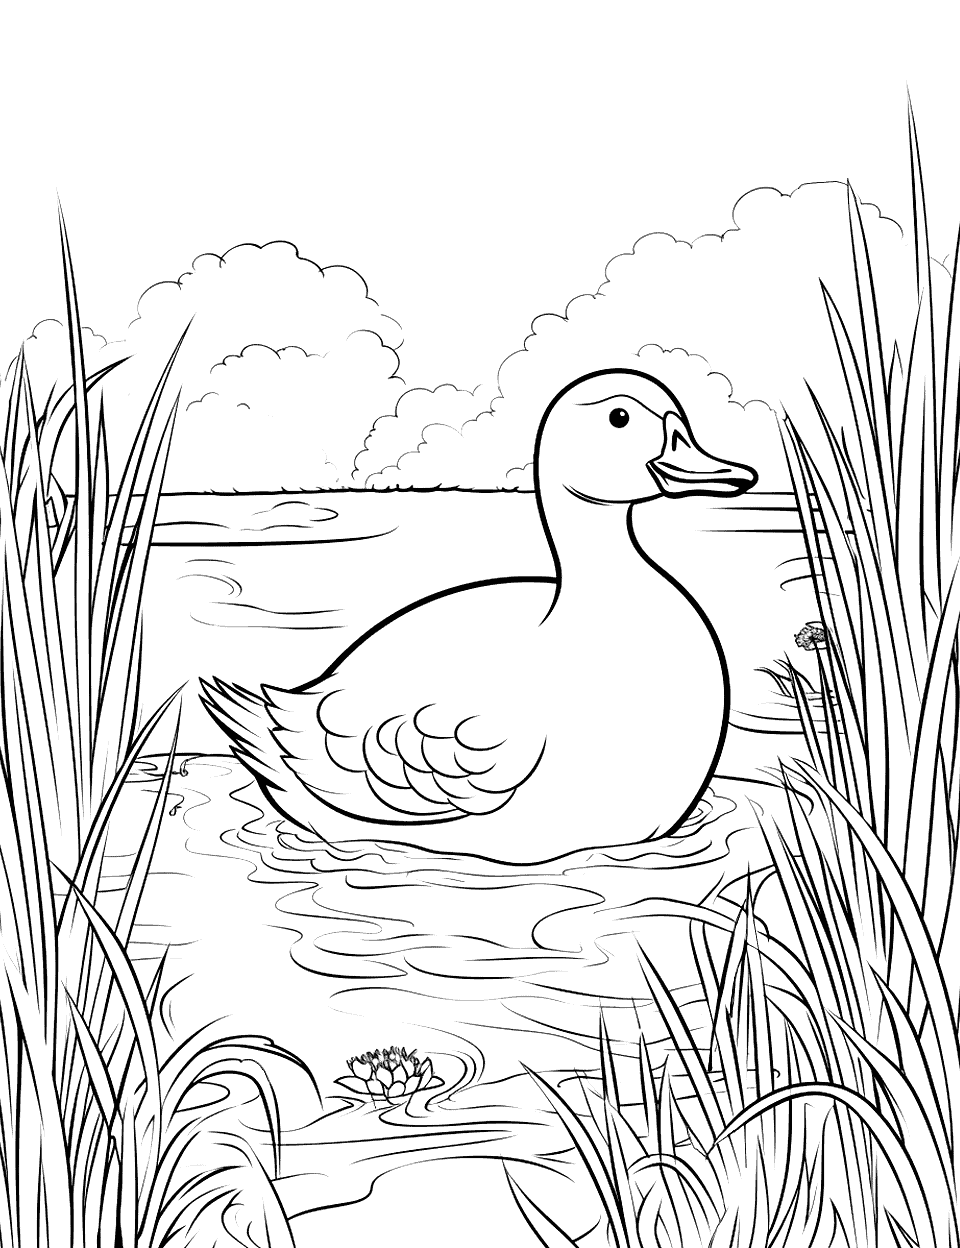 Duck Pond on the Farm Coloring Page - A pond with a duck swimming and reeds around.